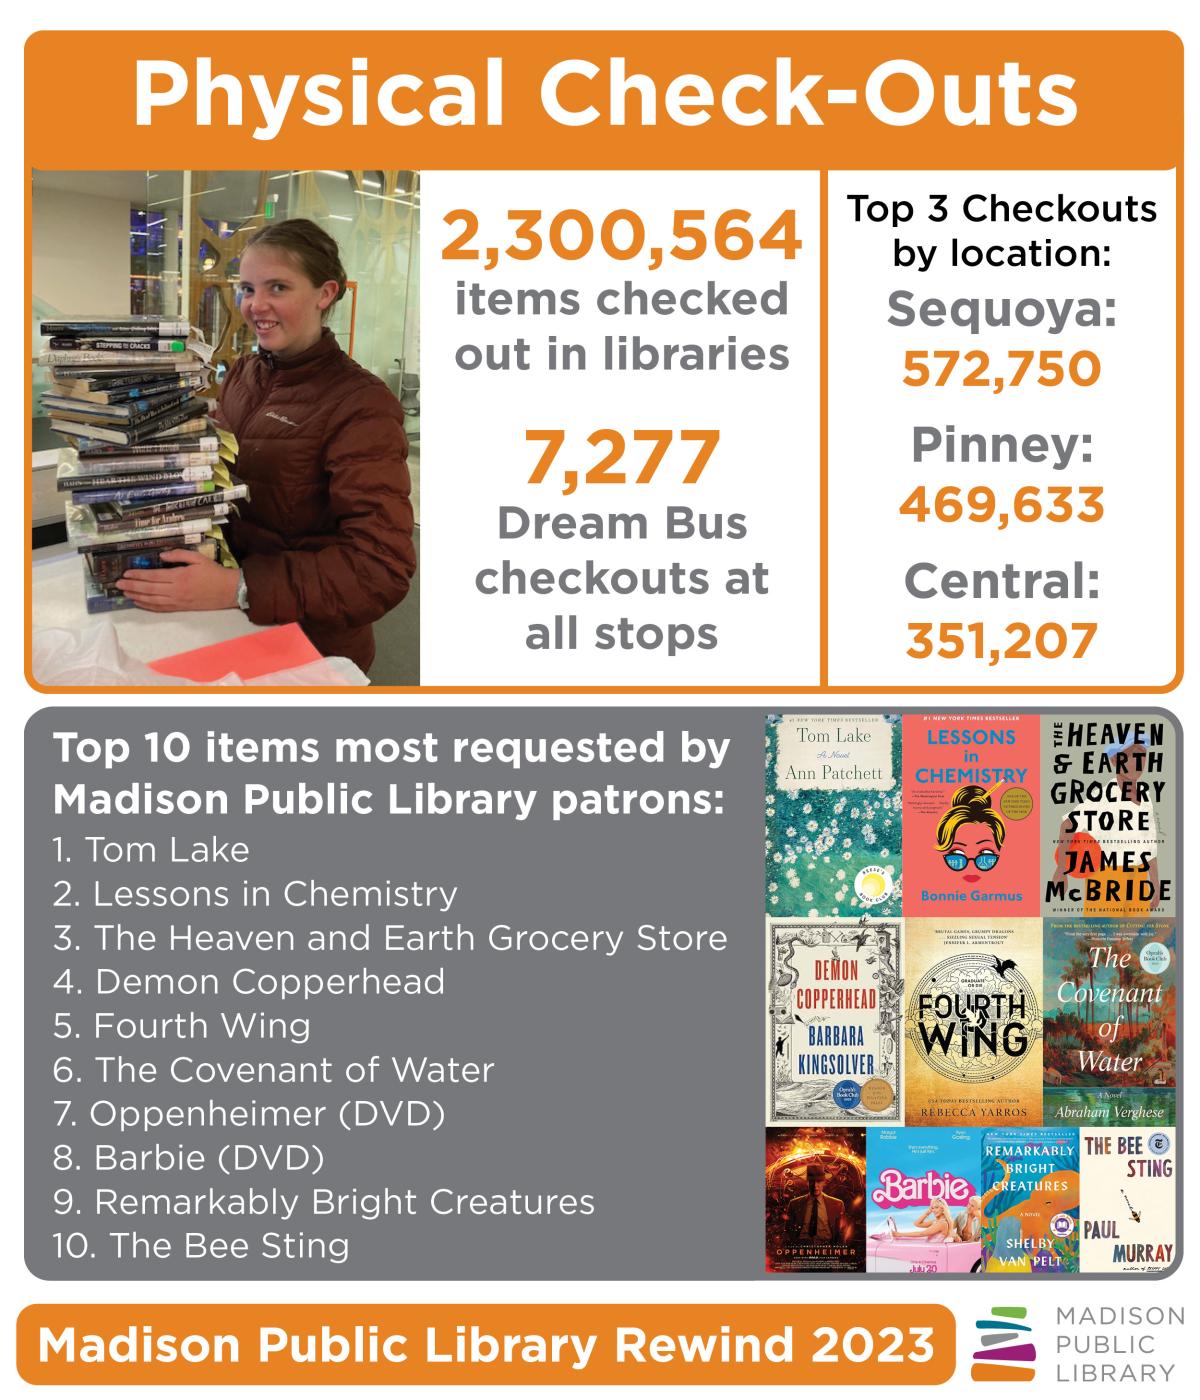  Madison Public Library Rewind 2023 - Physical Checkouts